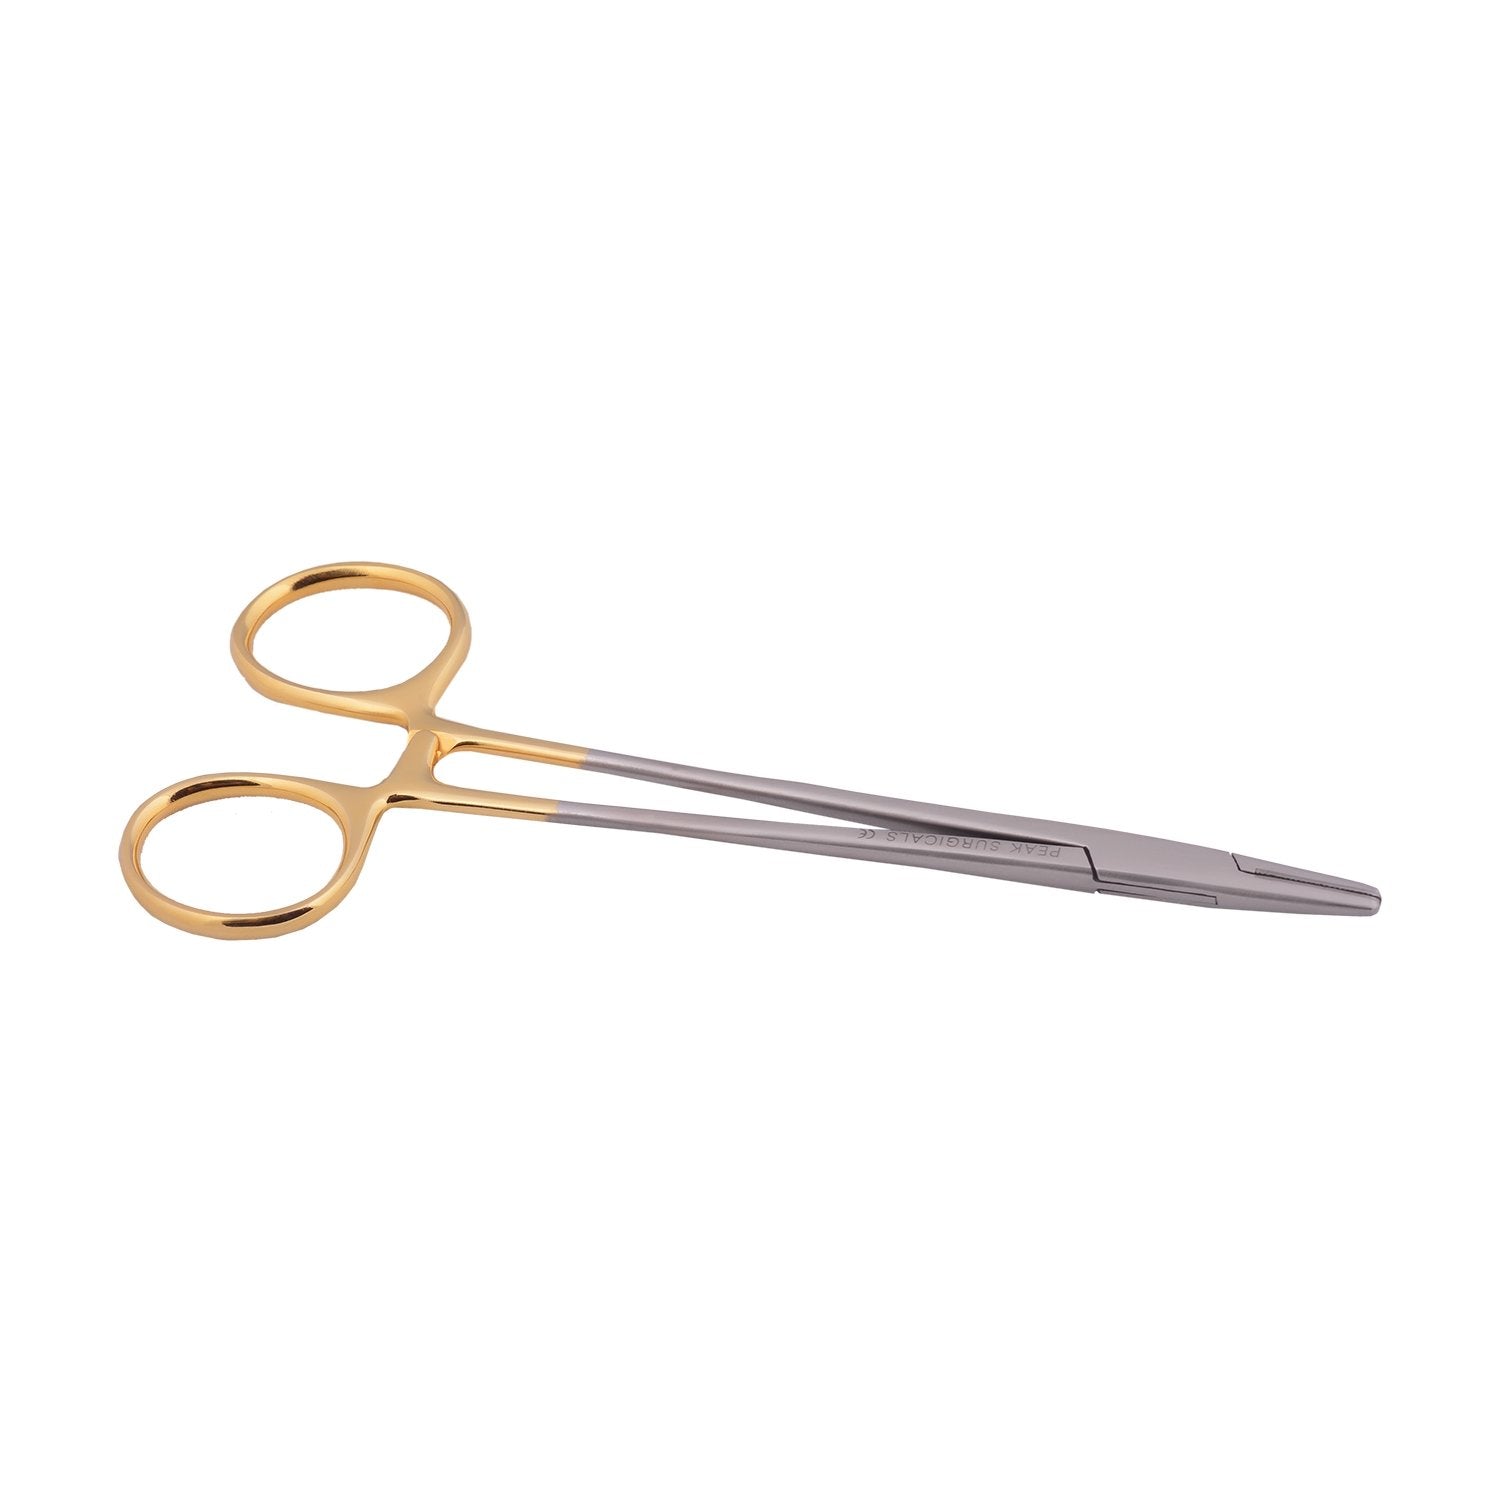 Crile-Wood Needle Holders Tungsten